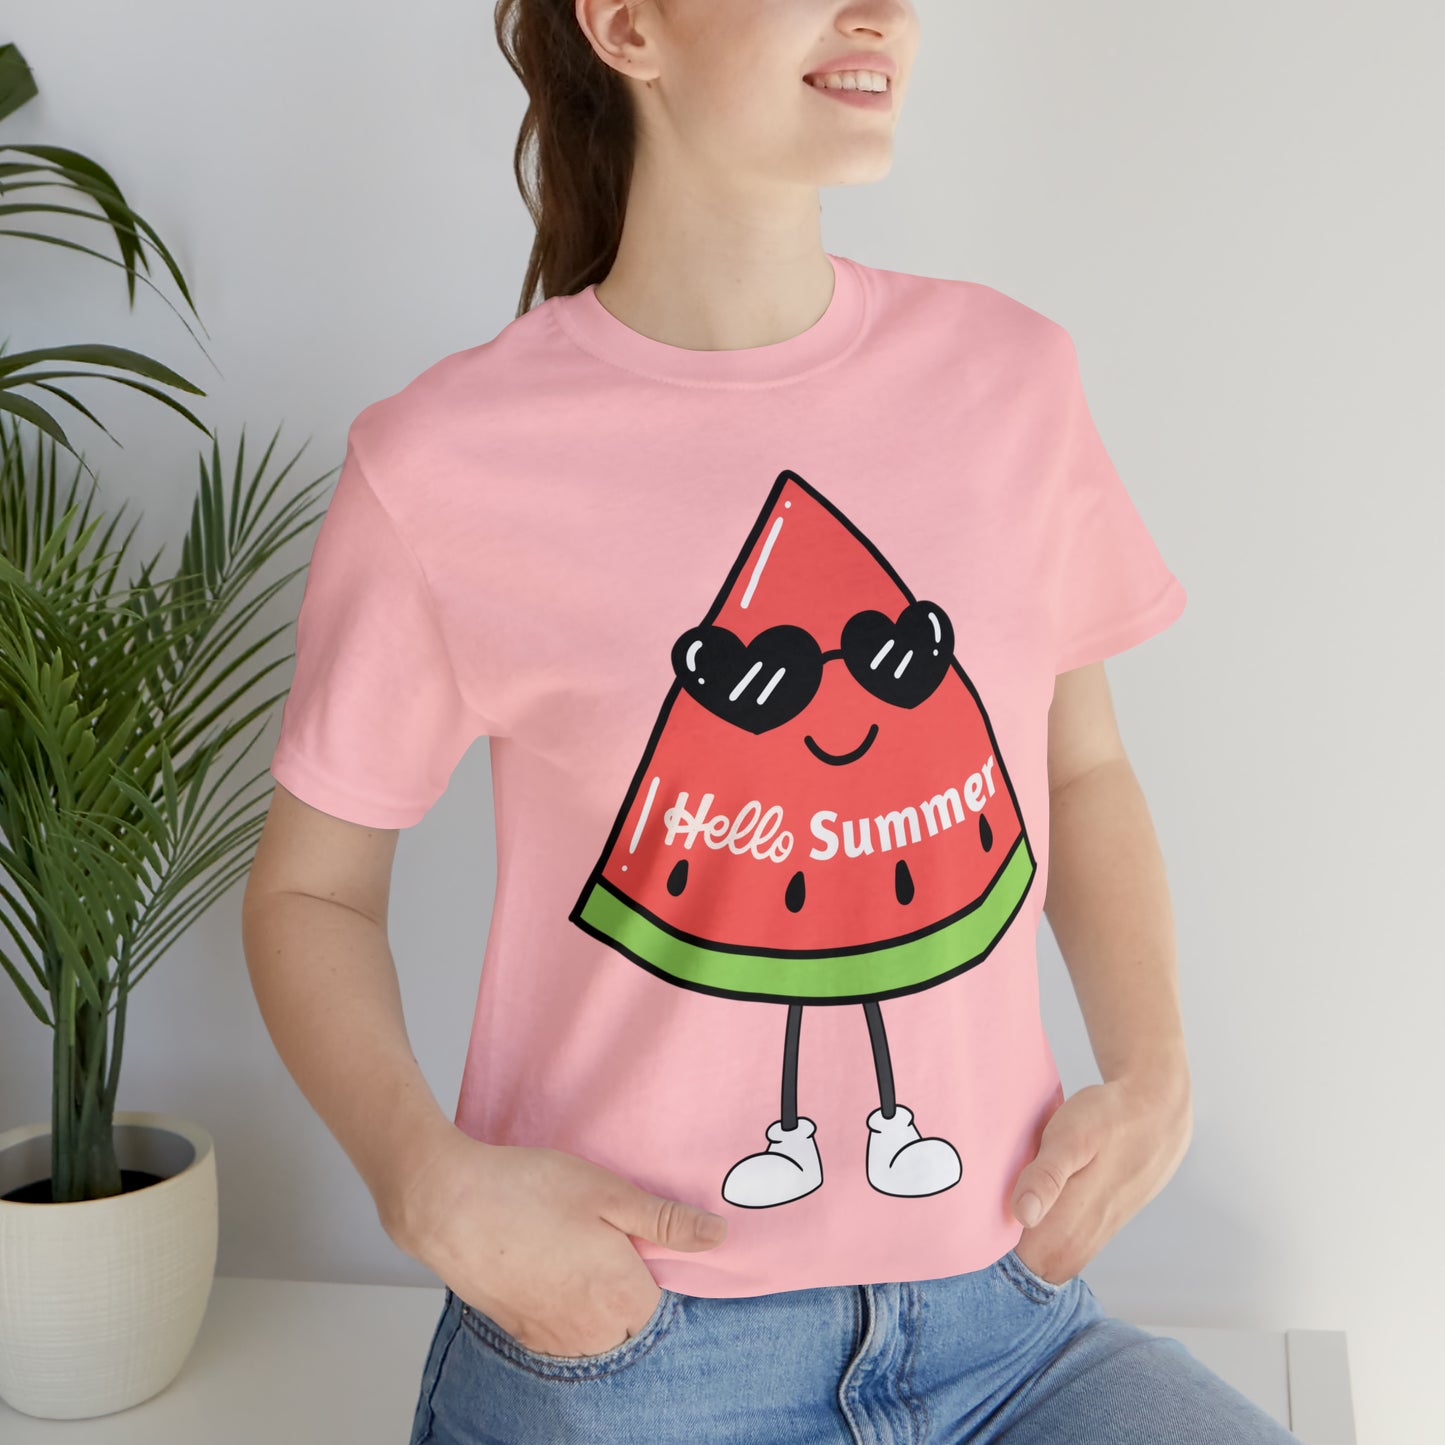 Funny Hello Summer Shirt, Summer shirts for women and men, Summer Casual Top Tee